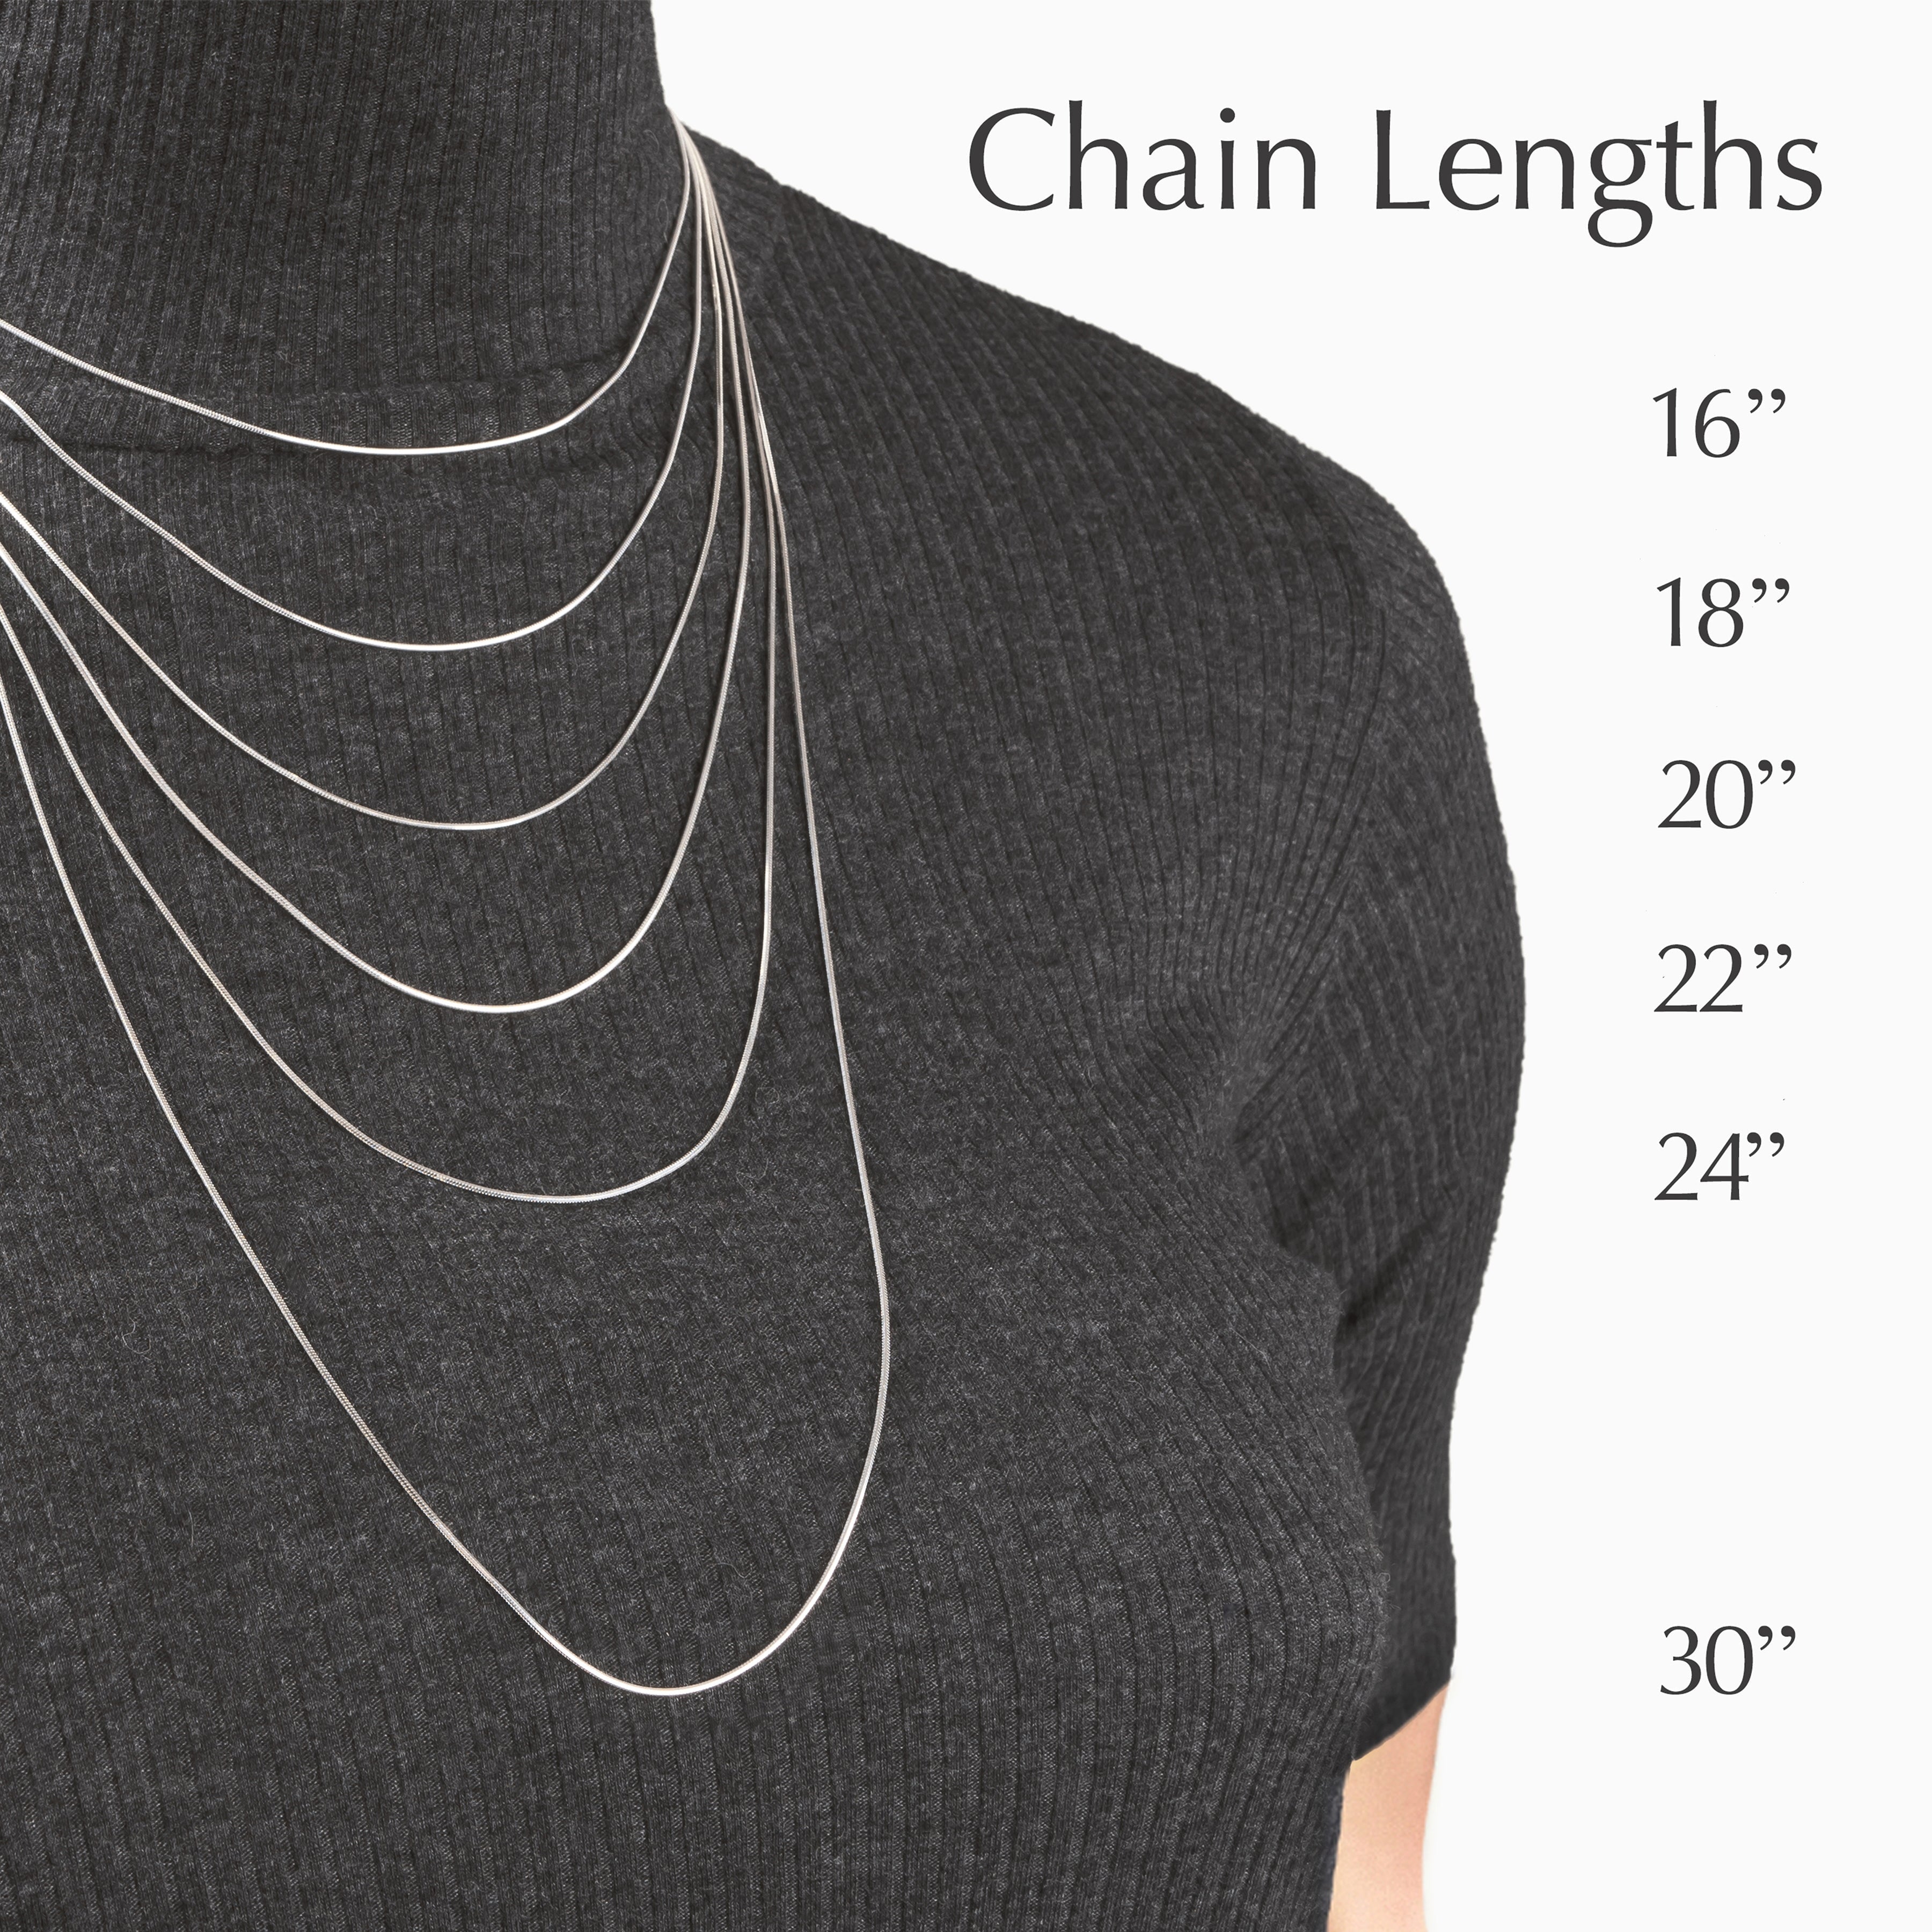 Model wearing sterling silver box chains in 16”, 18”, 20” 22”, 24” and 30” lengths.